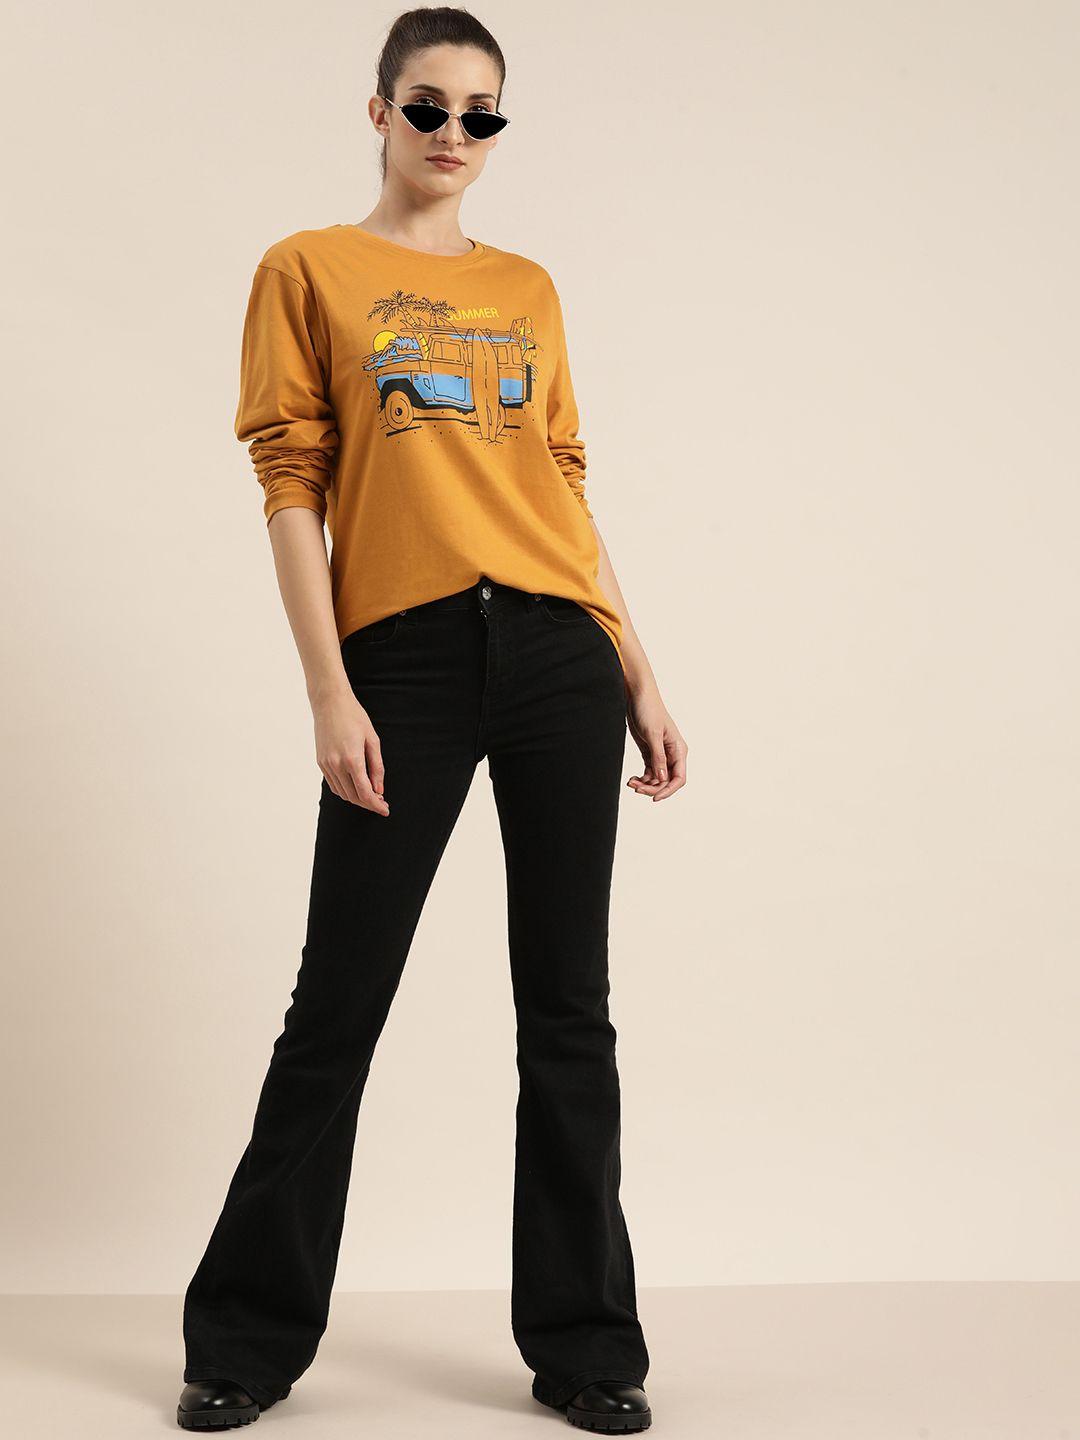 dillinger-women-mustard-yellow-graphic-printed-drop-shoulder-sleeves-cotton-loose-t-shirt